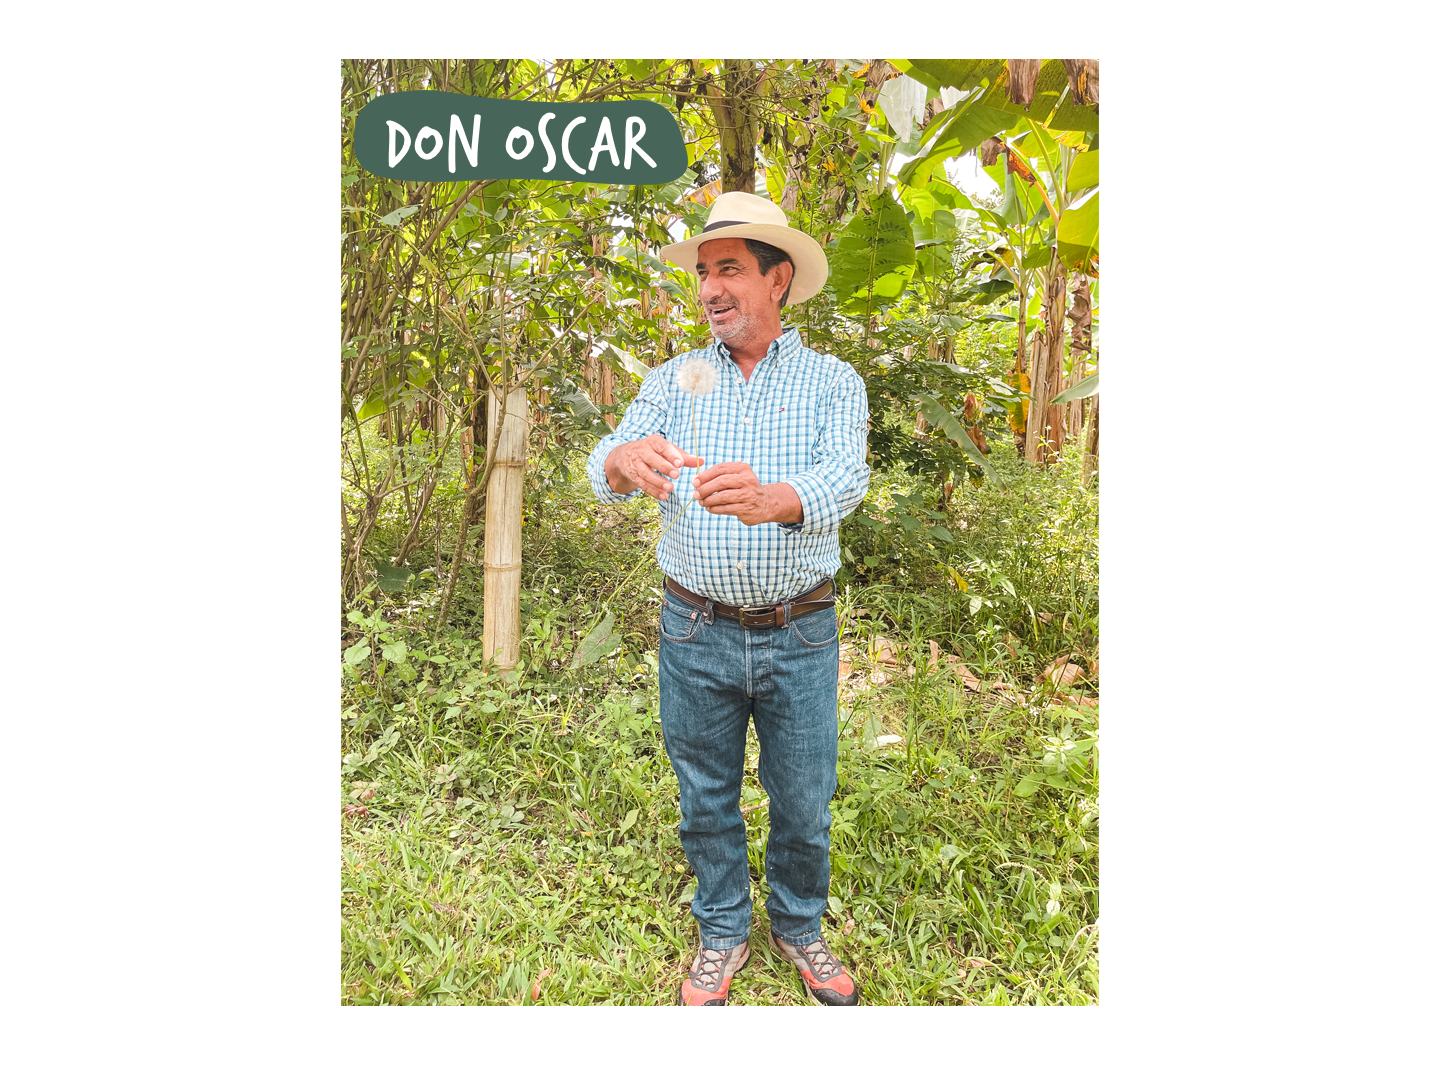 Photo of Don Oscar in one of his farms in Colombia's Coffee Region